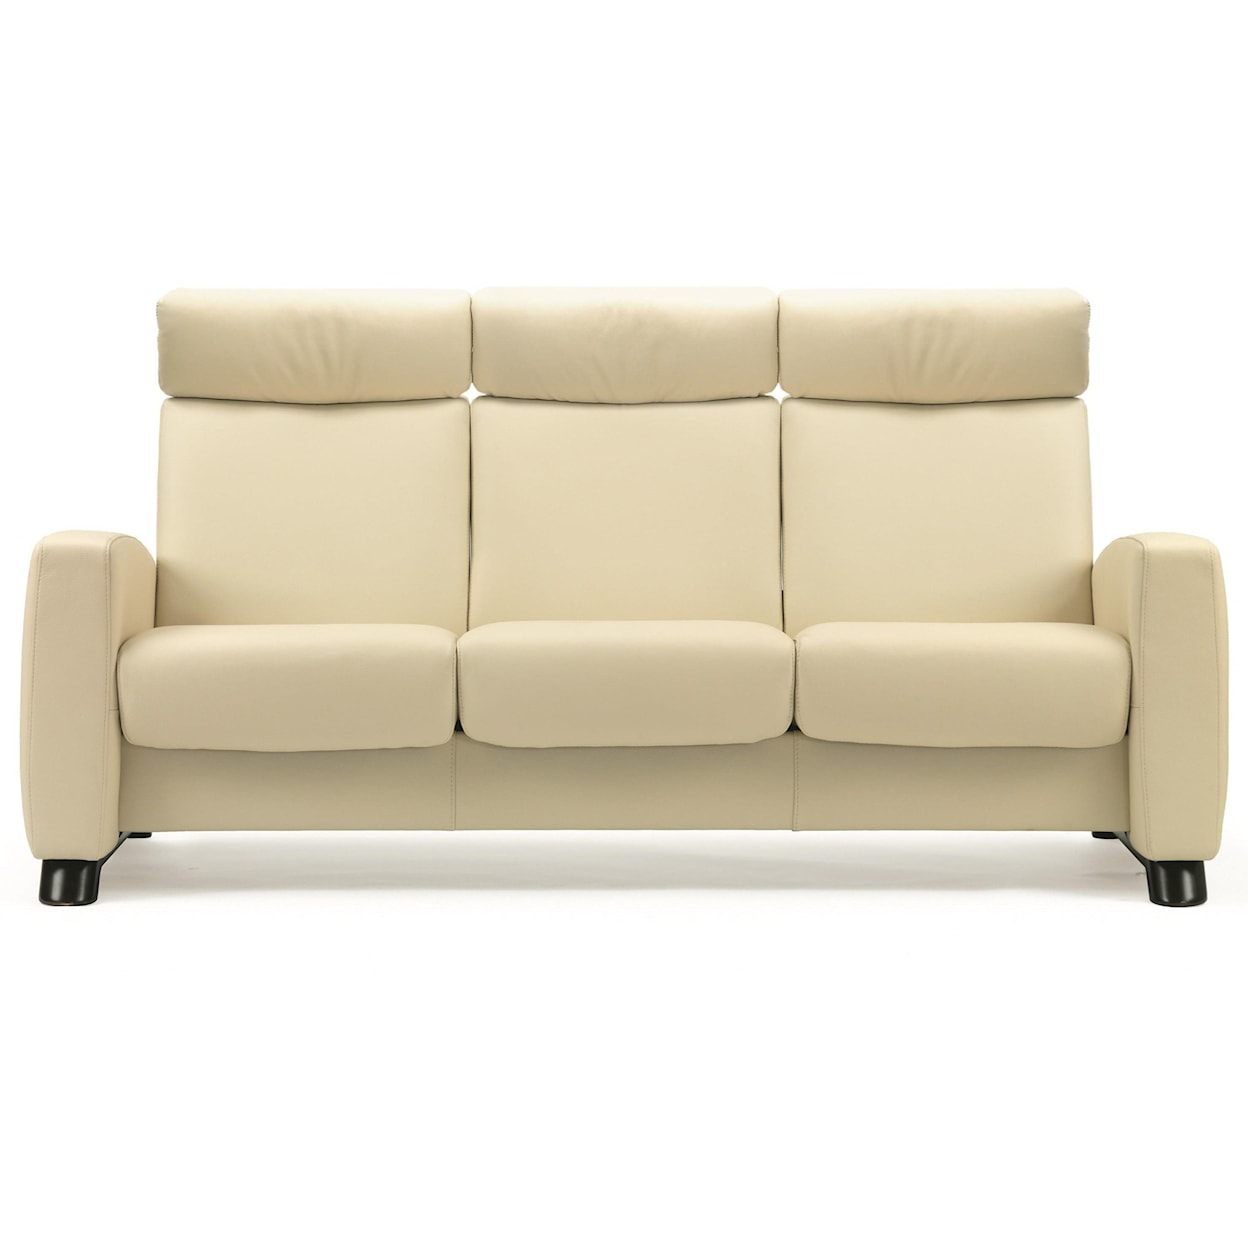 Stressless by Ekornes Arion 19 - A10 High-Back Reclining Sofa